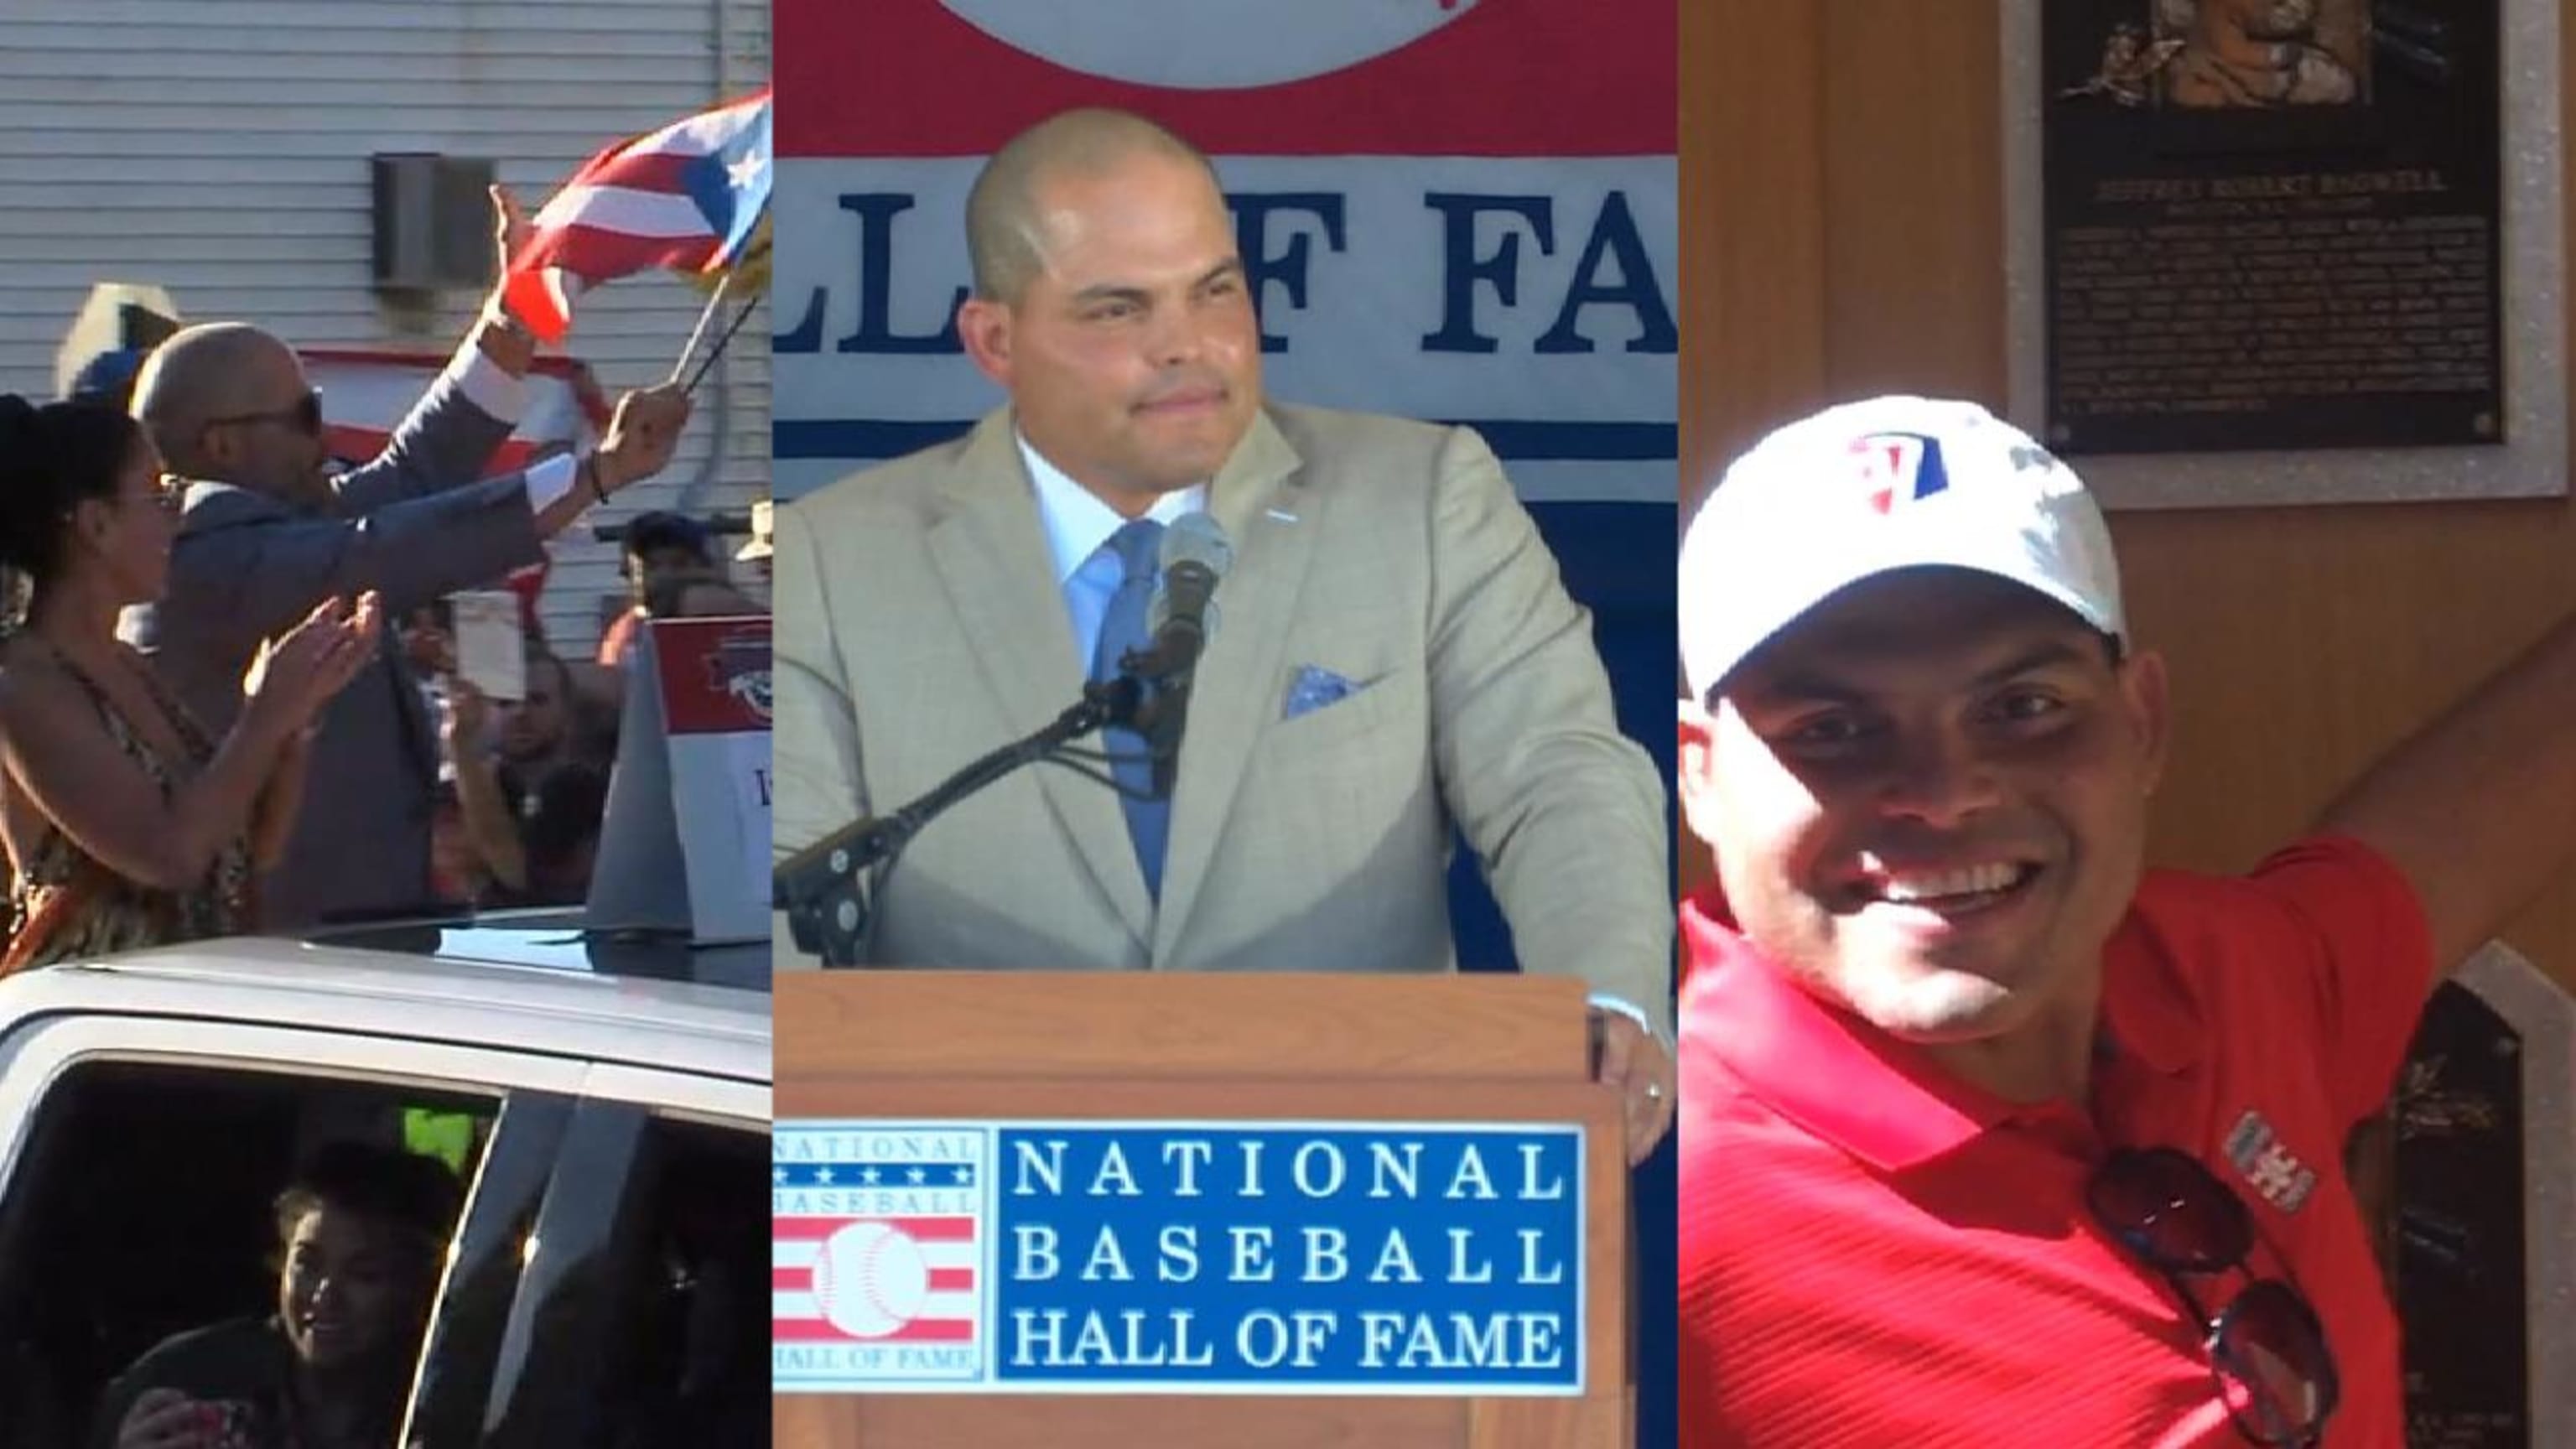 Enjoy some vintage Ivan 'Pudge' Rodriguez GIFs and moments in celebration  of his 46th birthday